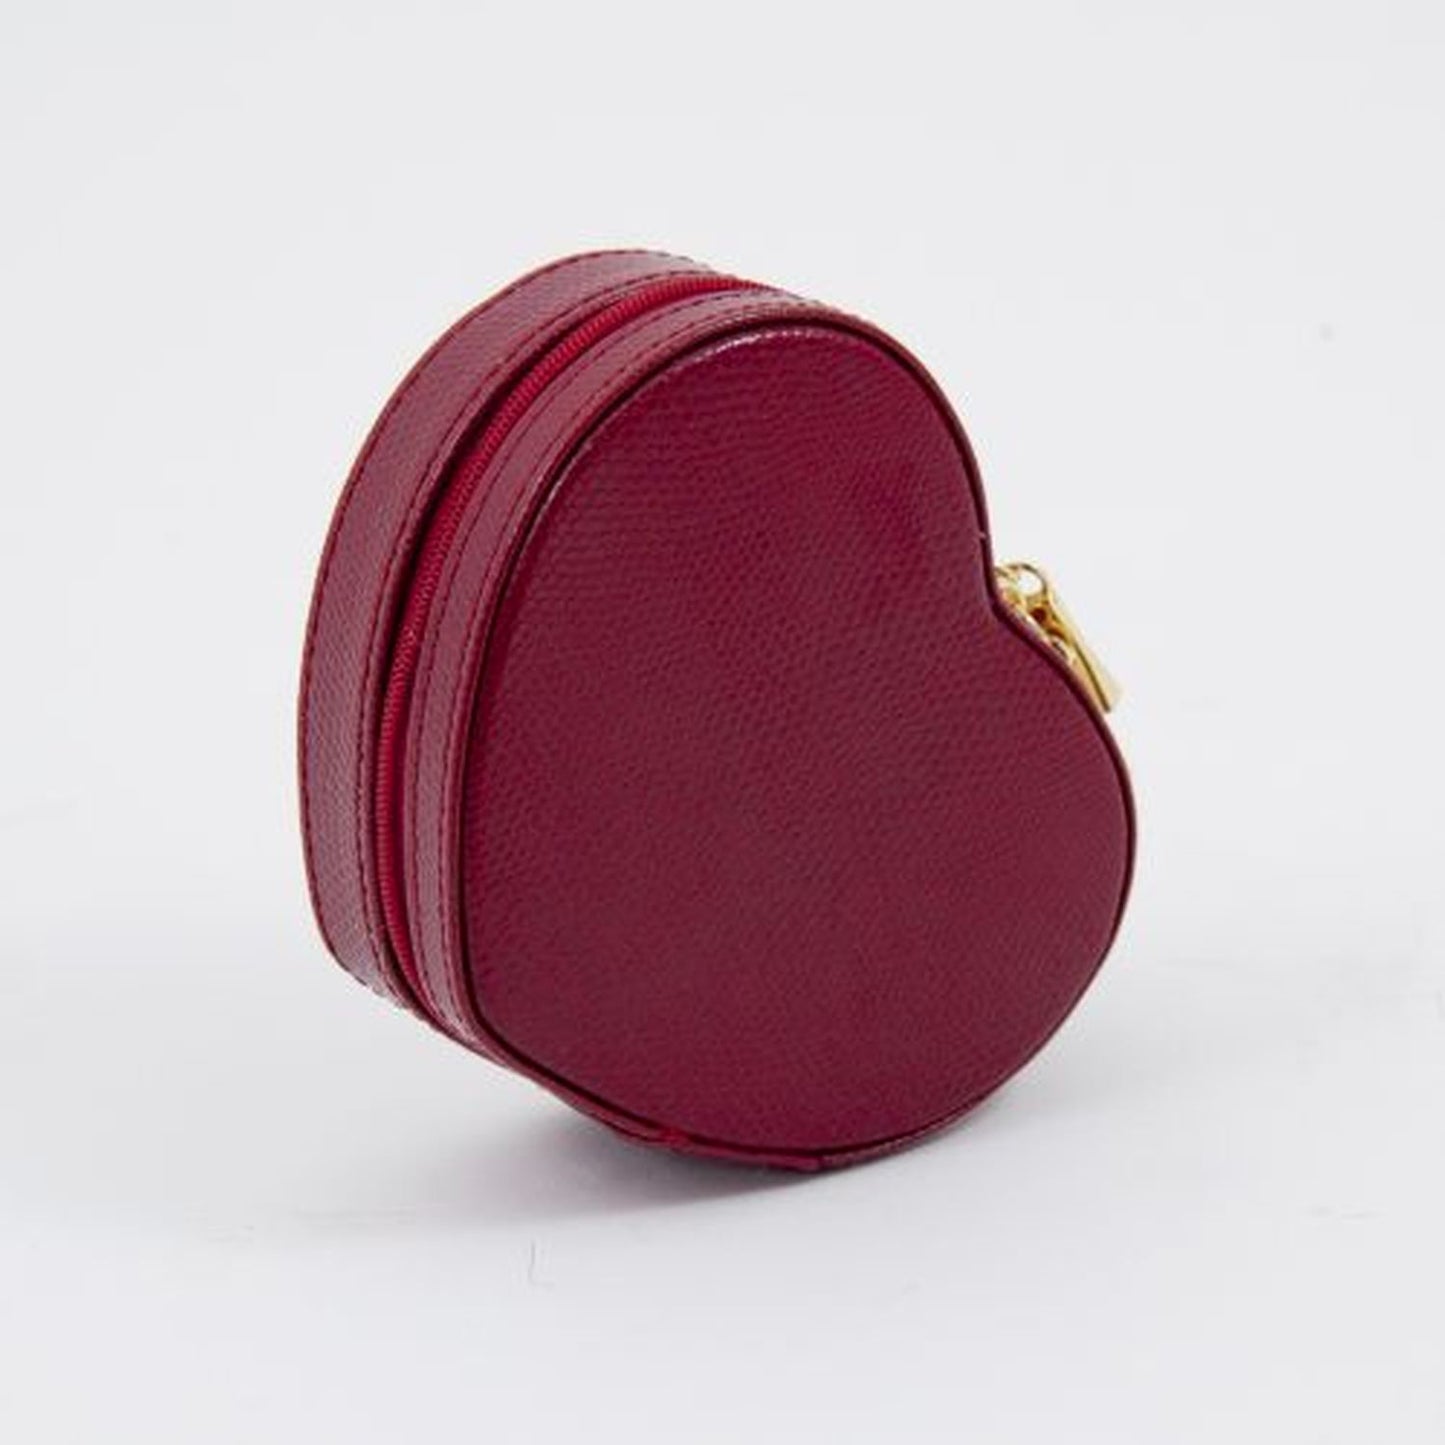 Red "Lizard" Leather Small Heart Shaped Jewelry Box